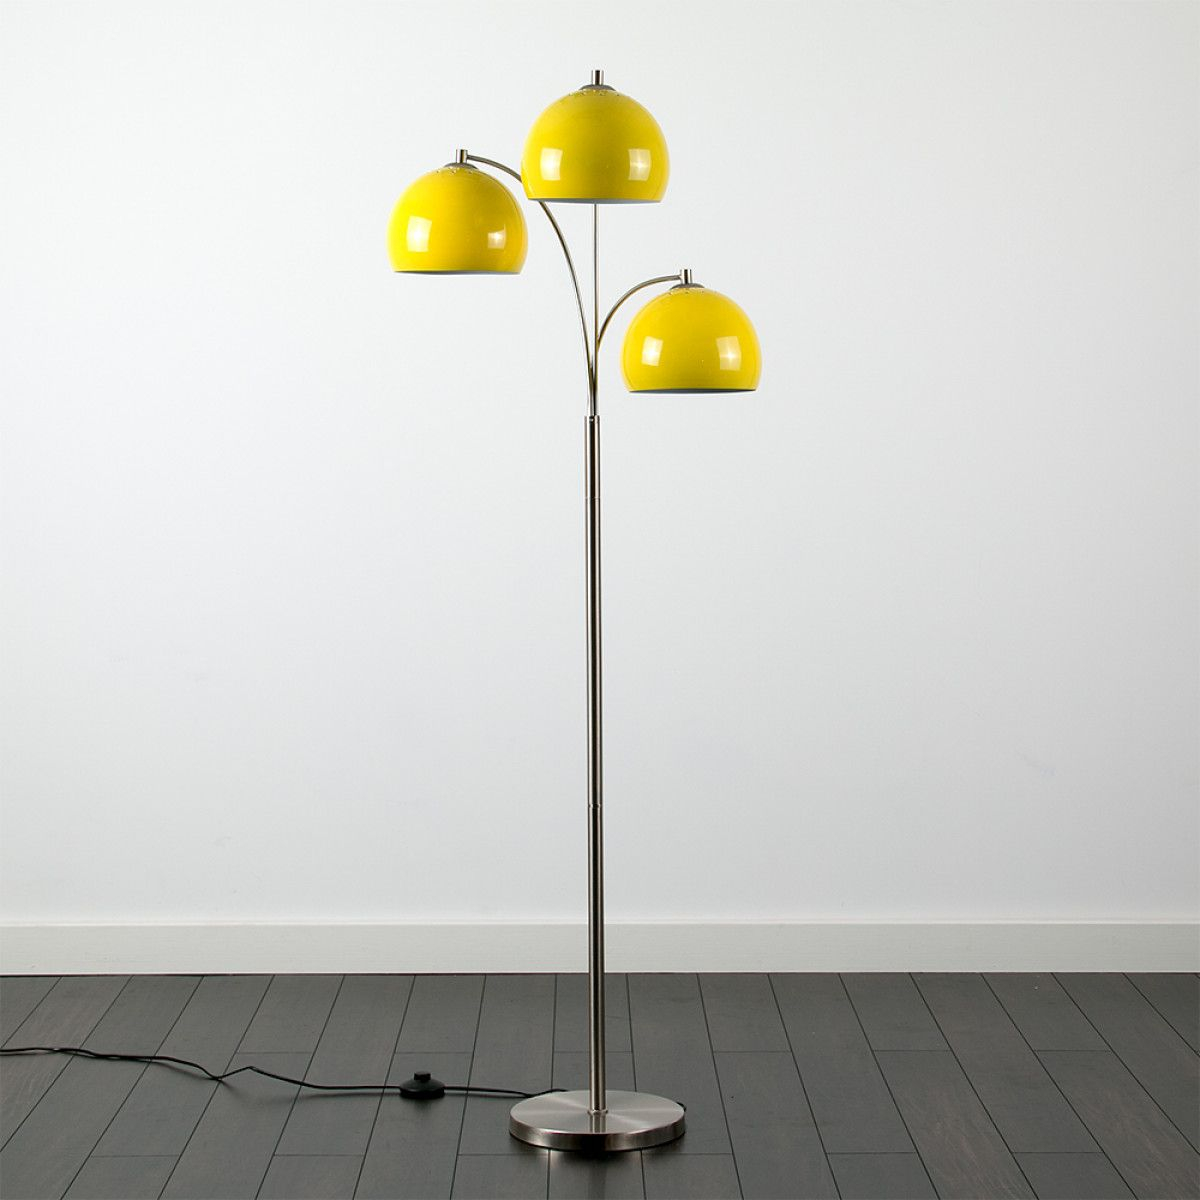 Dantzig Satin Nickel 3 Arm Floor Lamp With Yellow Dome intended for size 1200 X 1200